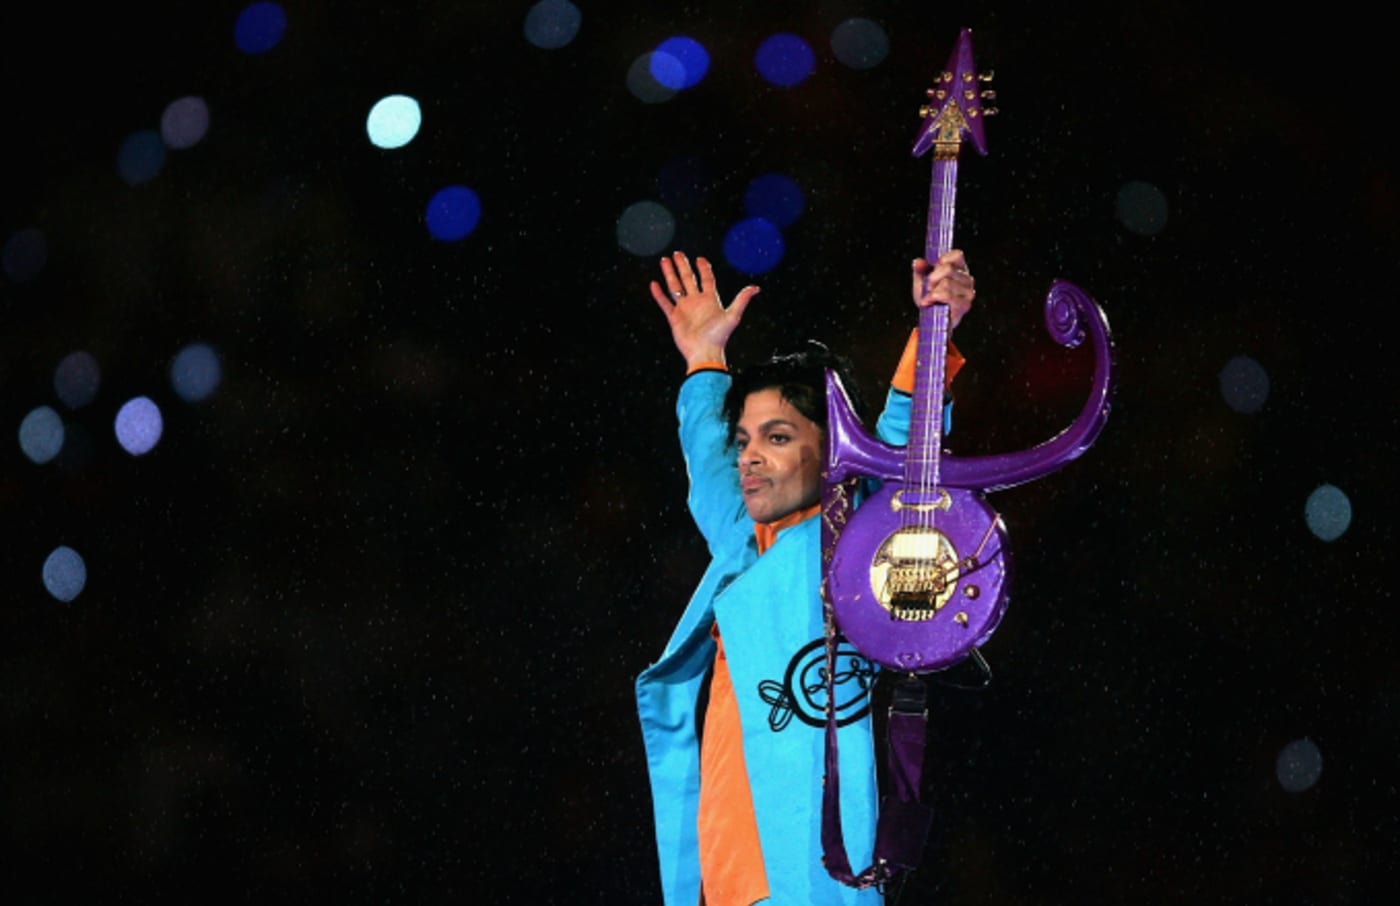 Prince performs during the 'Pepsi Halftime Show' at Super Bowl XLI